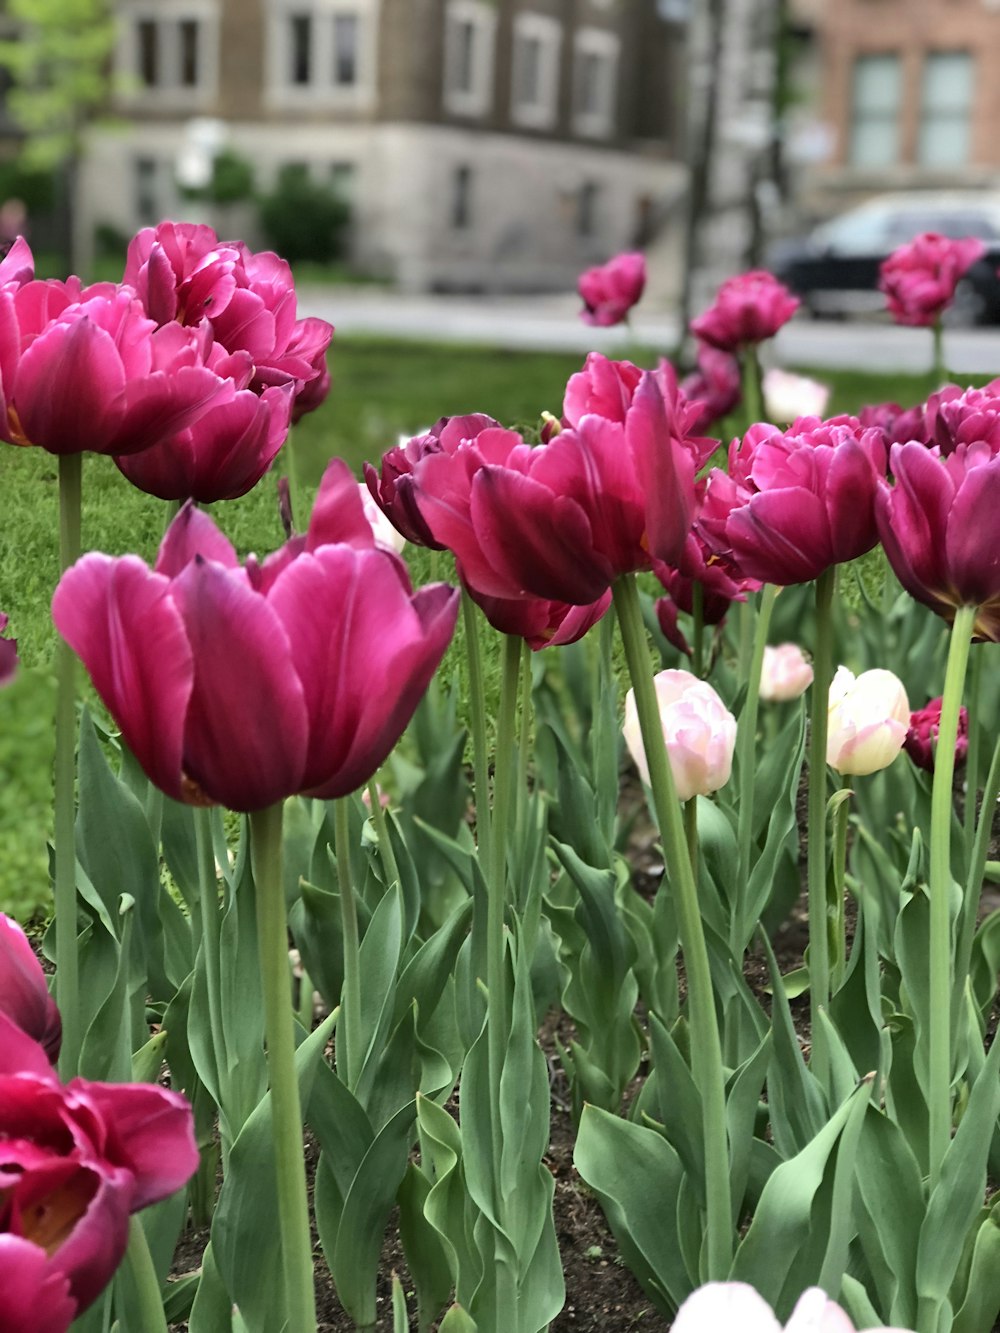 red and white tulips in bloom during daytime